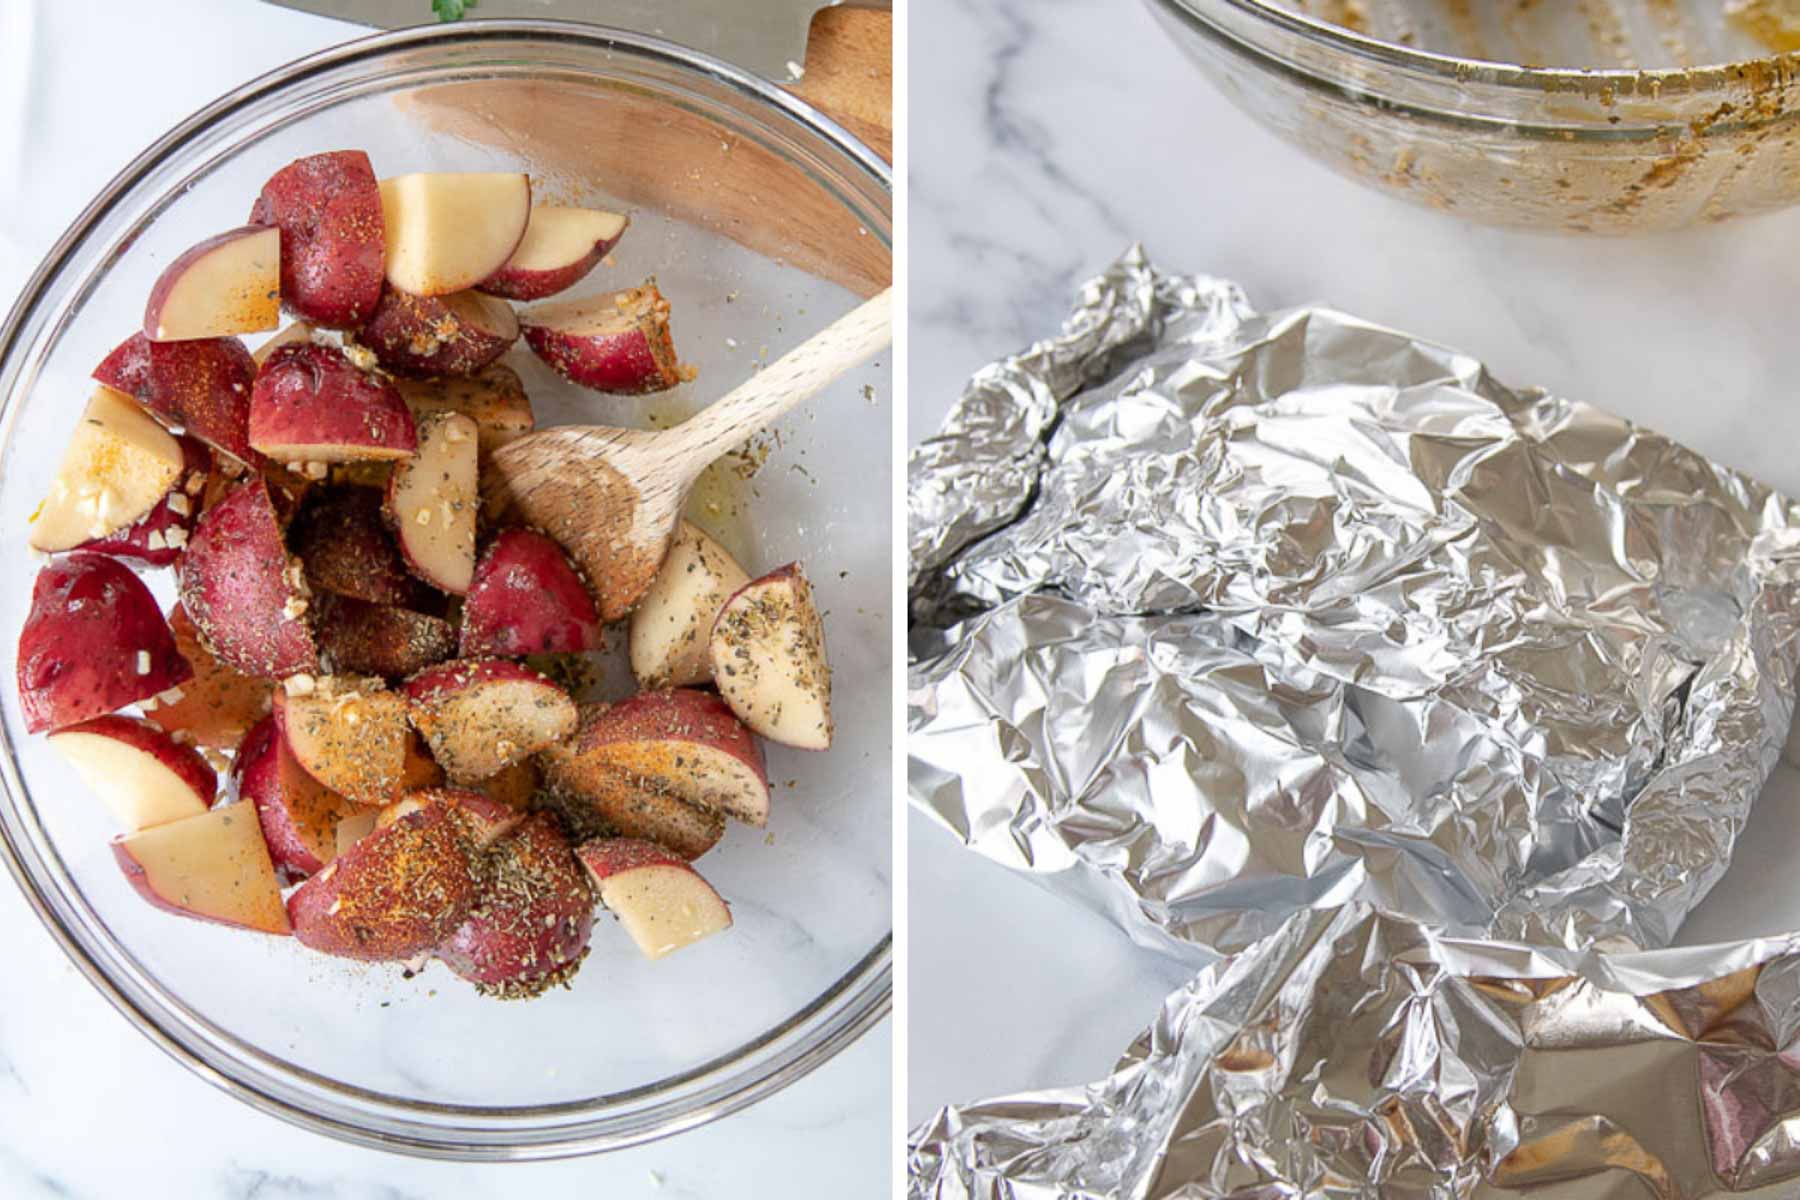 images showing how to make grilled potatoes.